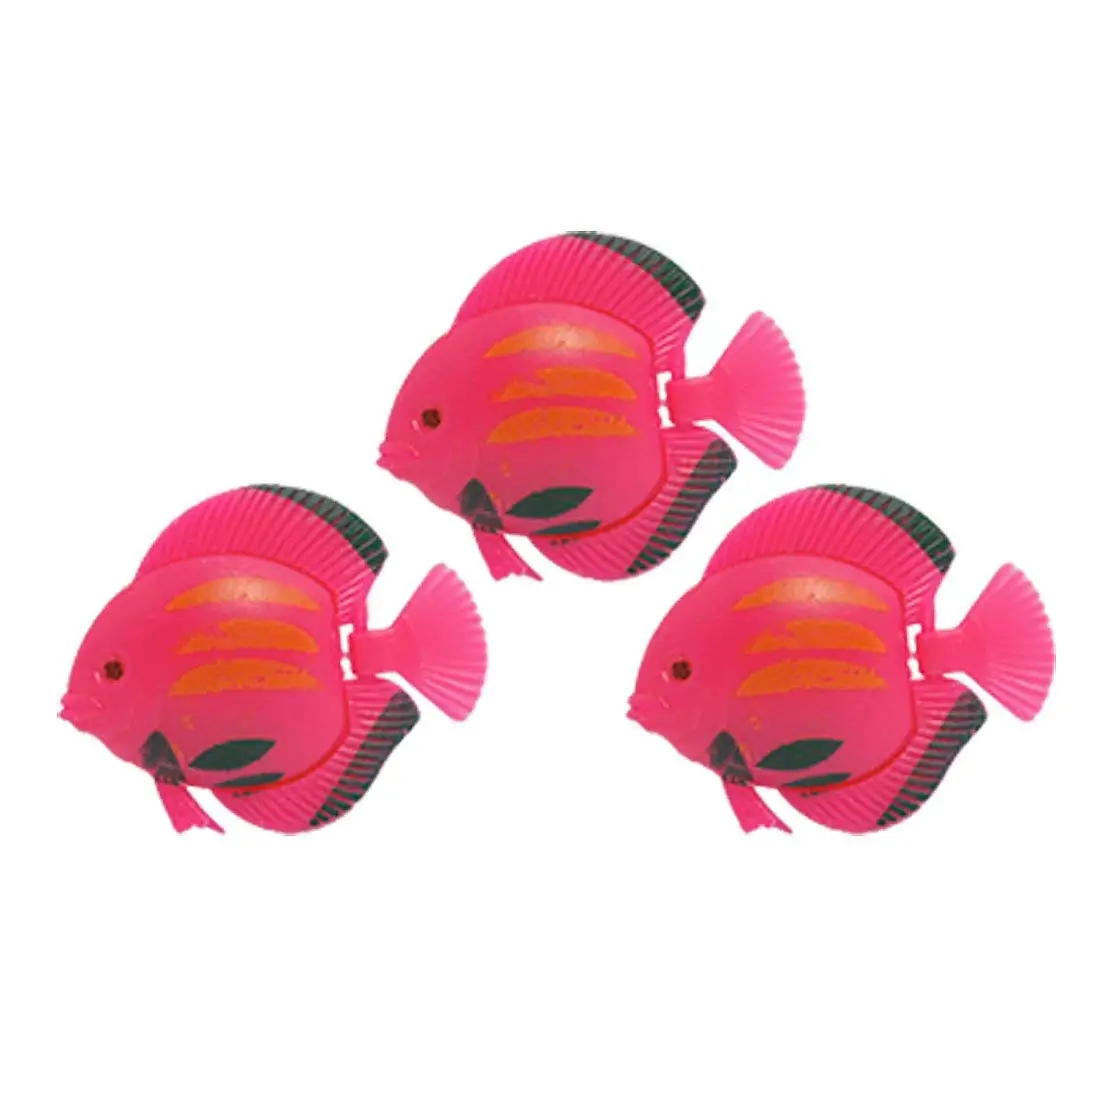 Cheap Plastic Floating Fish Toy, find Plastic Floating Fish Toy deals ...